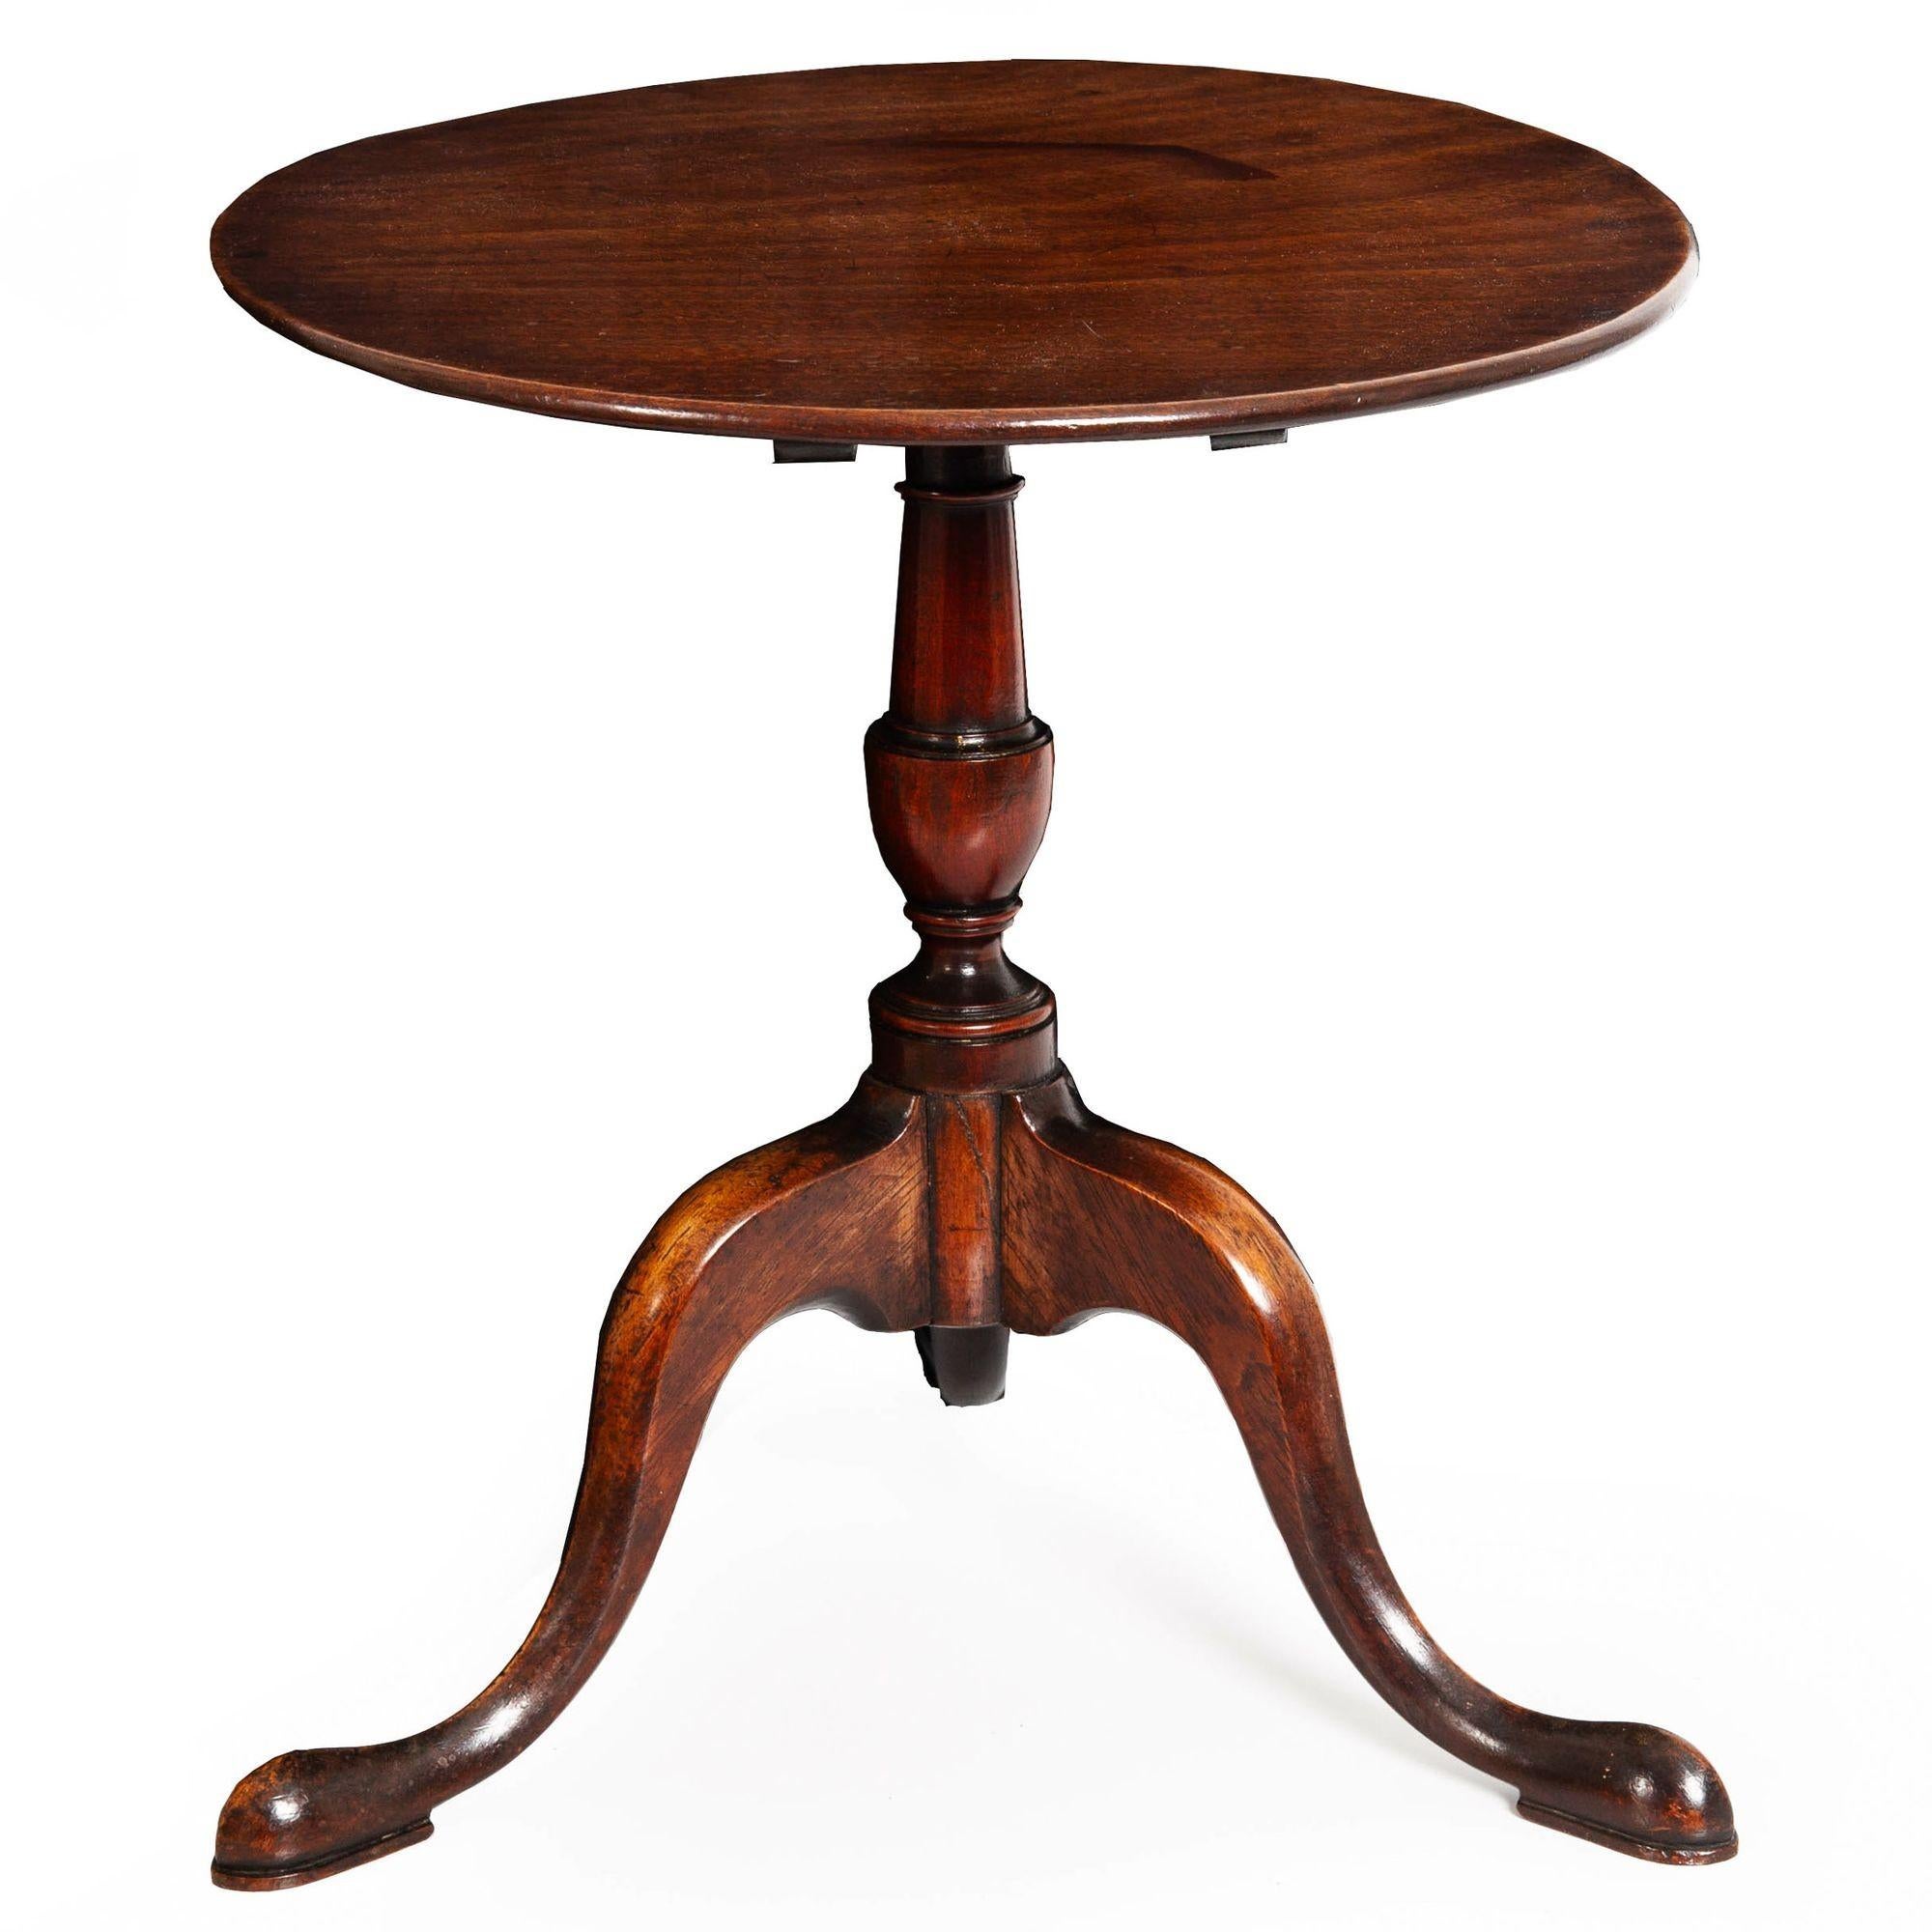 A RARE AND FINE QUEEN ANNE MAHOGANY MINIATURE SALESMAN'S SAMPLE TILT-TOP CANDLESTAND
England, circa last quarter of the 18th century
Item # 403RPJ02P

An exceedingly fine and rare salesman's sample of a perfectly scaled-down tilting top candlestand,